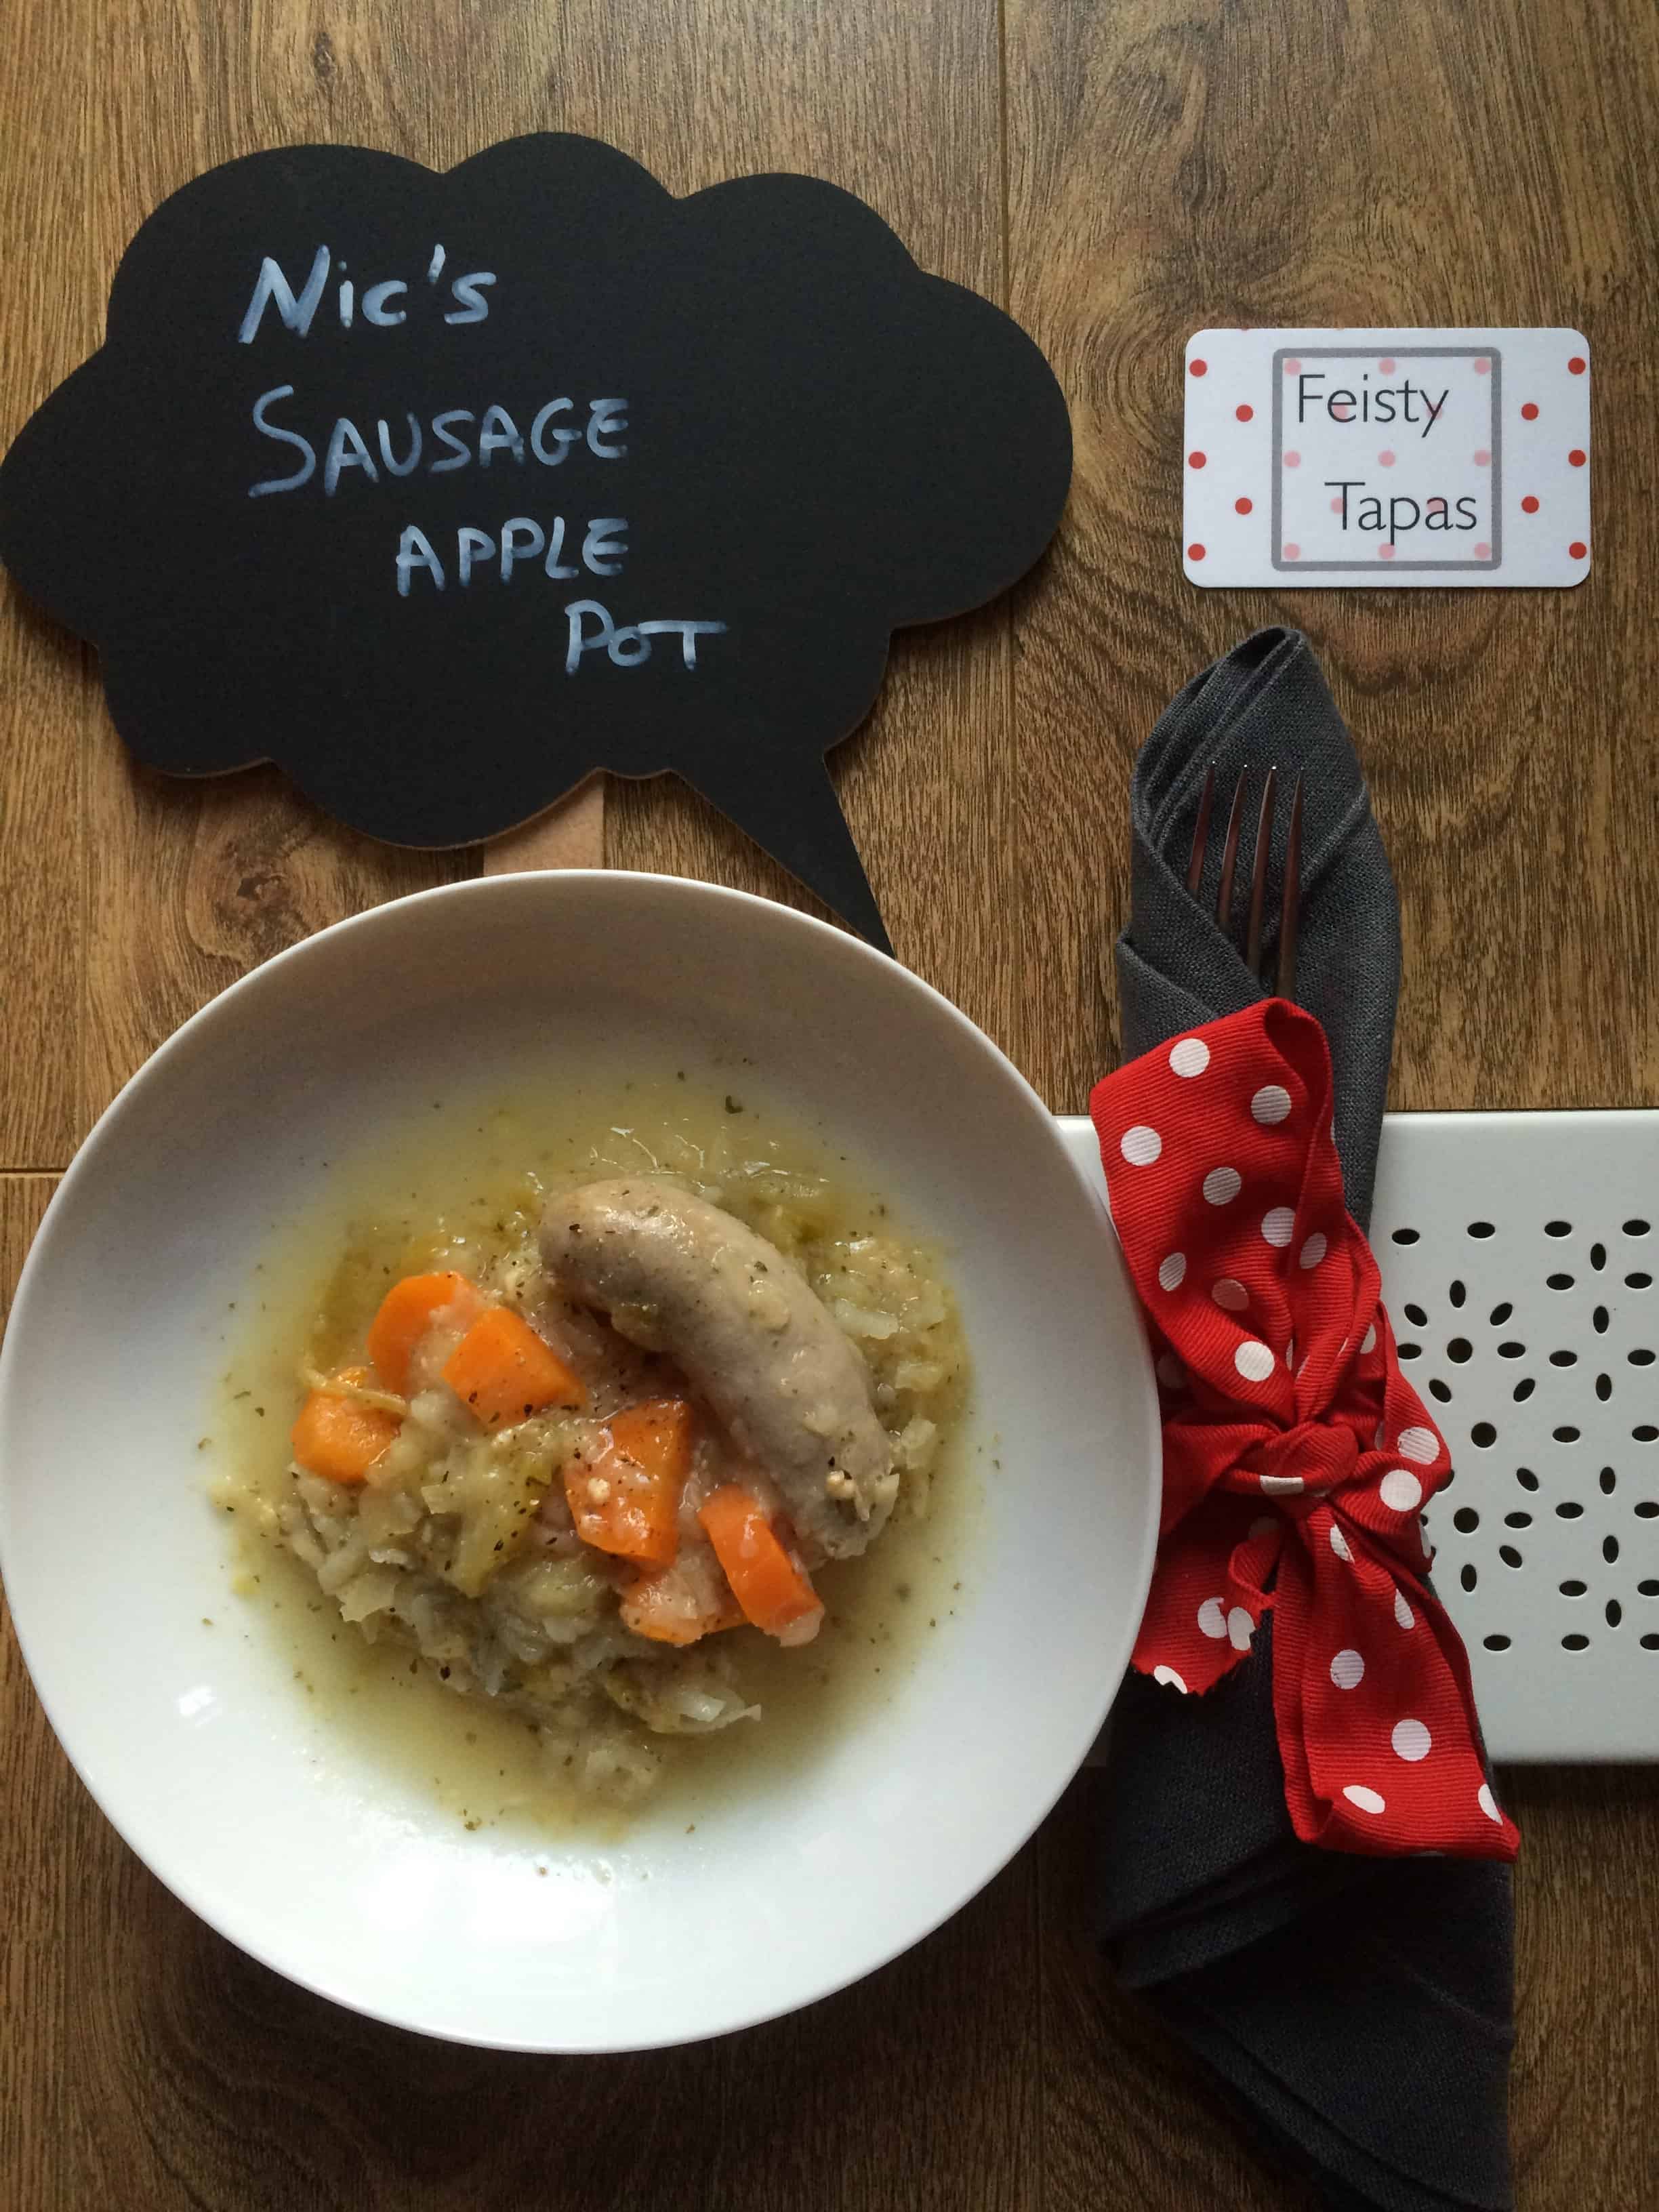 Nic's Instant Pot Pressure Cooker Sausage Apple Pot. A delicious dish seen here served on a deep white plat with a grey napkin wrapped in a red and white polka dot ribbon to the right and the Feisty Tapas logo on a card on the top right. There's also a chalkboard with the name of the recipe written on it